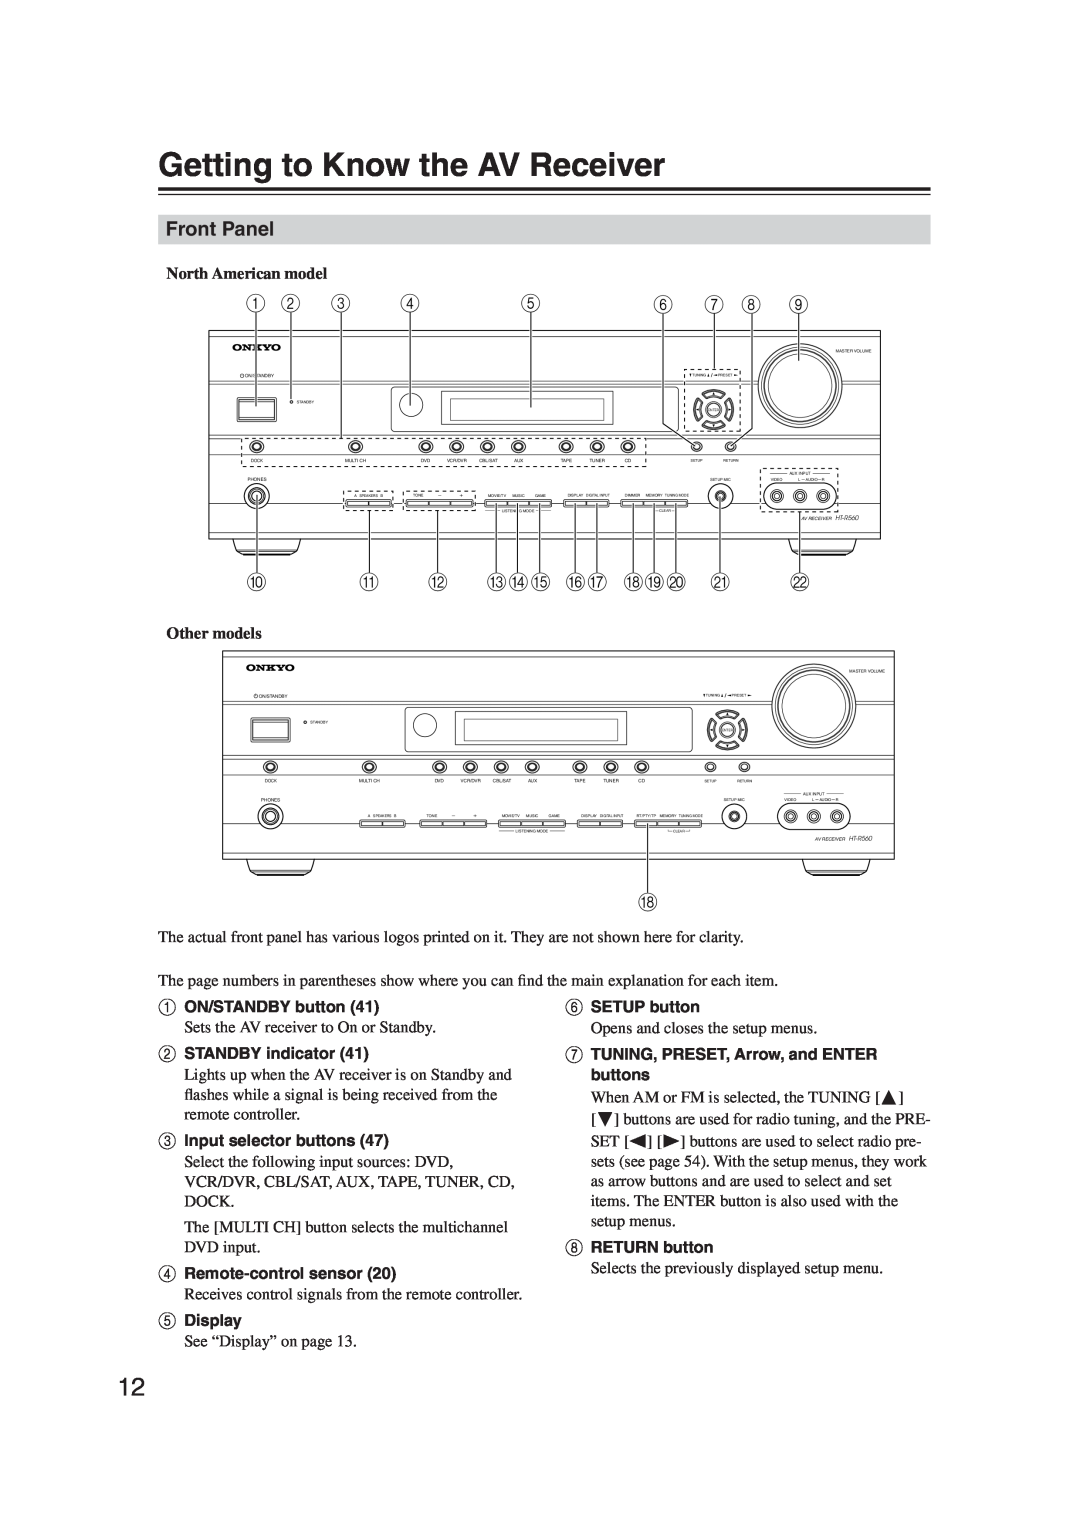 Onkyo S5100 instruction manual Getting to Know the AV Receiver, Front Panel 